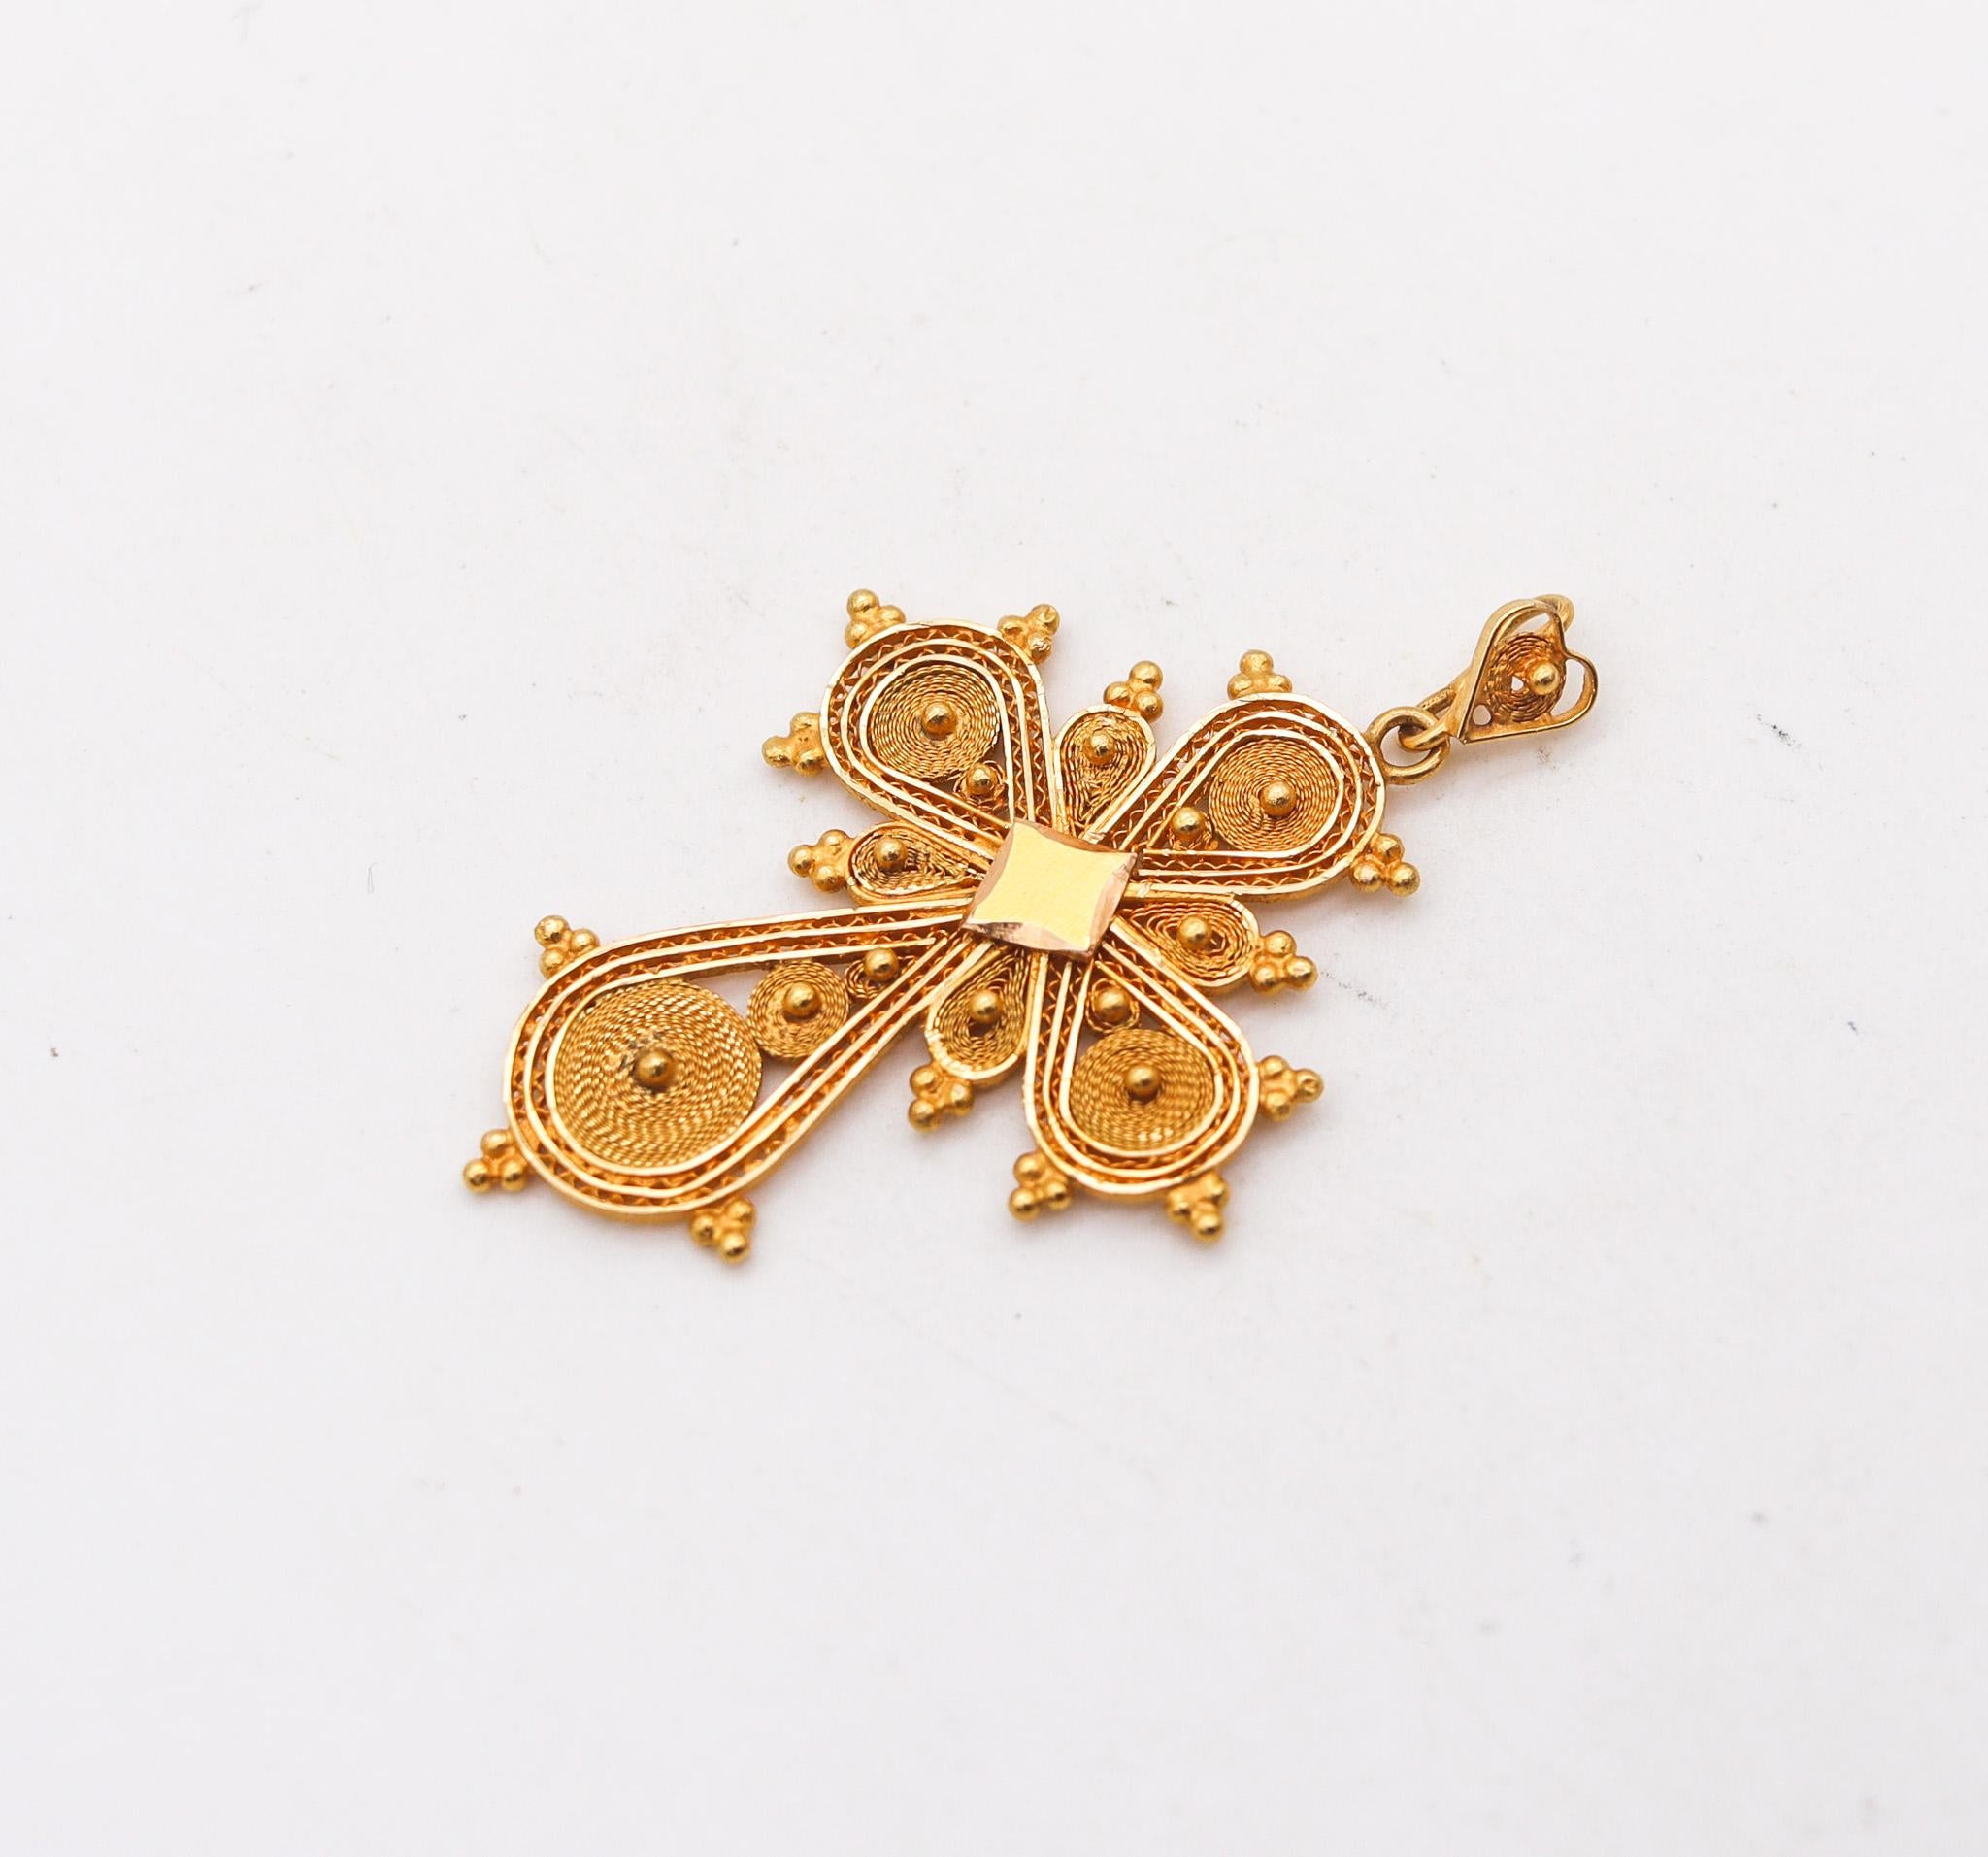 Portuguese filigree pendant cross.

Beautiful pendant cross, created in Portugal, during the Victorian era, back in the 1850 or earlier. Crafted in the shape of a Byzantine cross, with the filigree technique in solid yellow gold of 18 and 21 karats